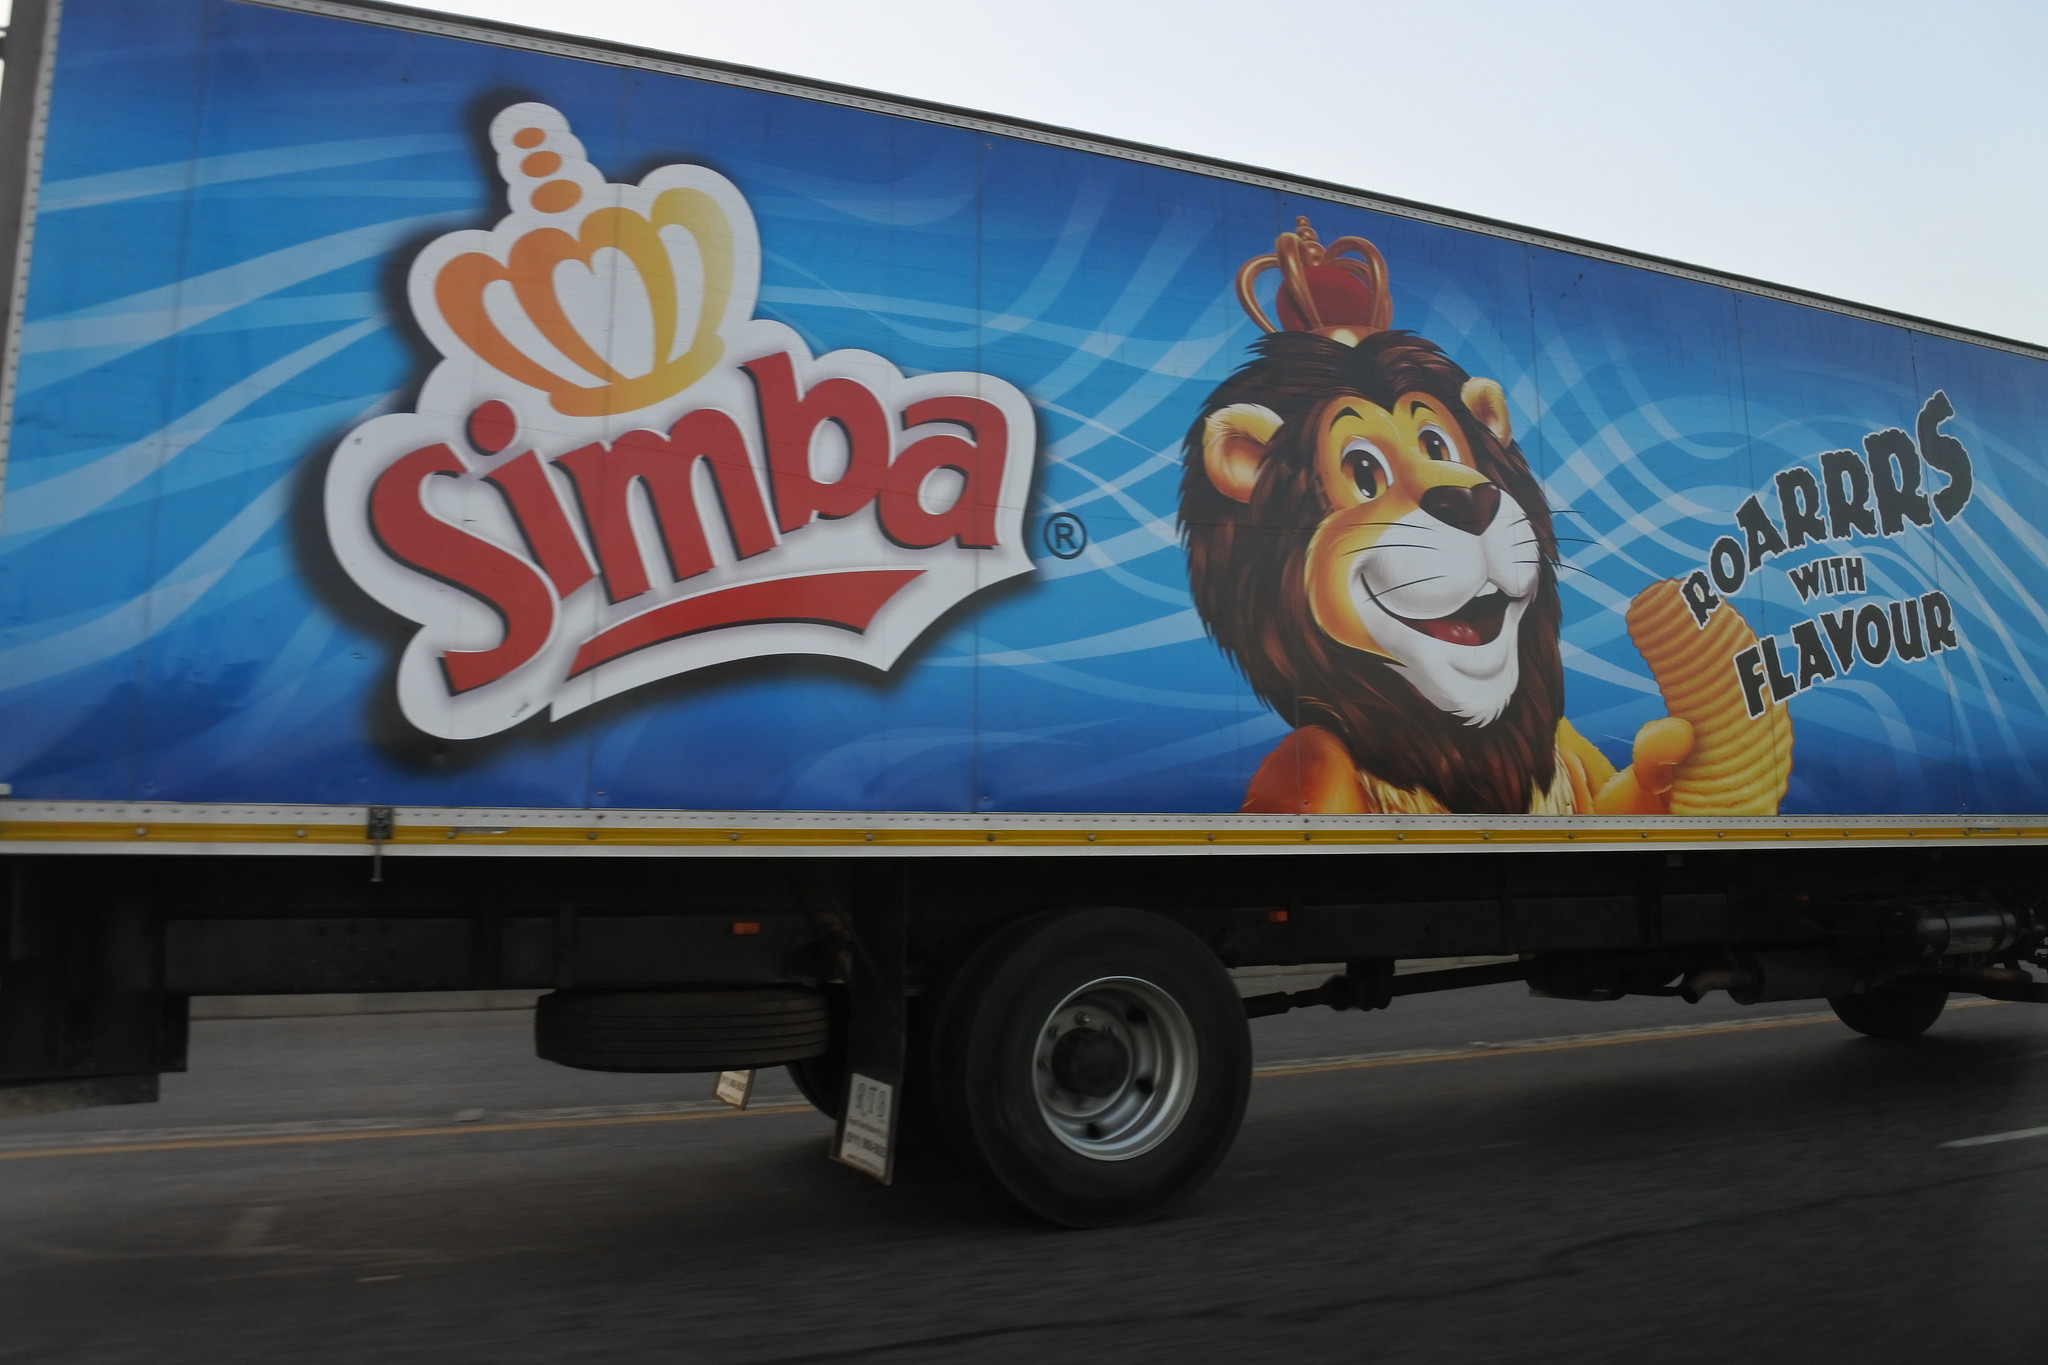 Simba. I don't know this brand. I took this photo in South Africa